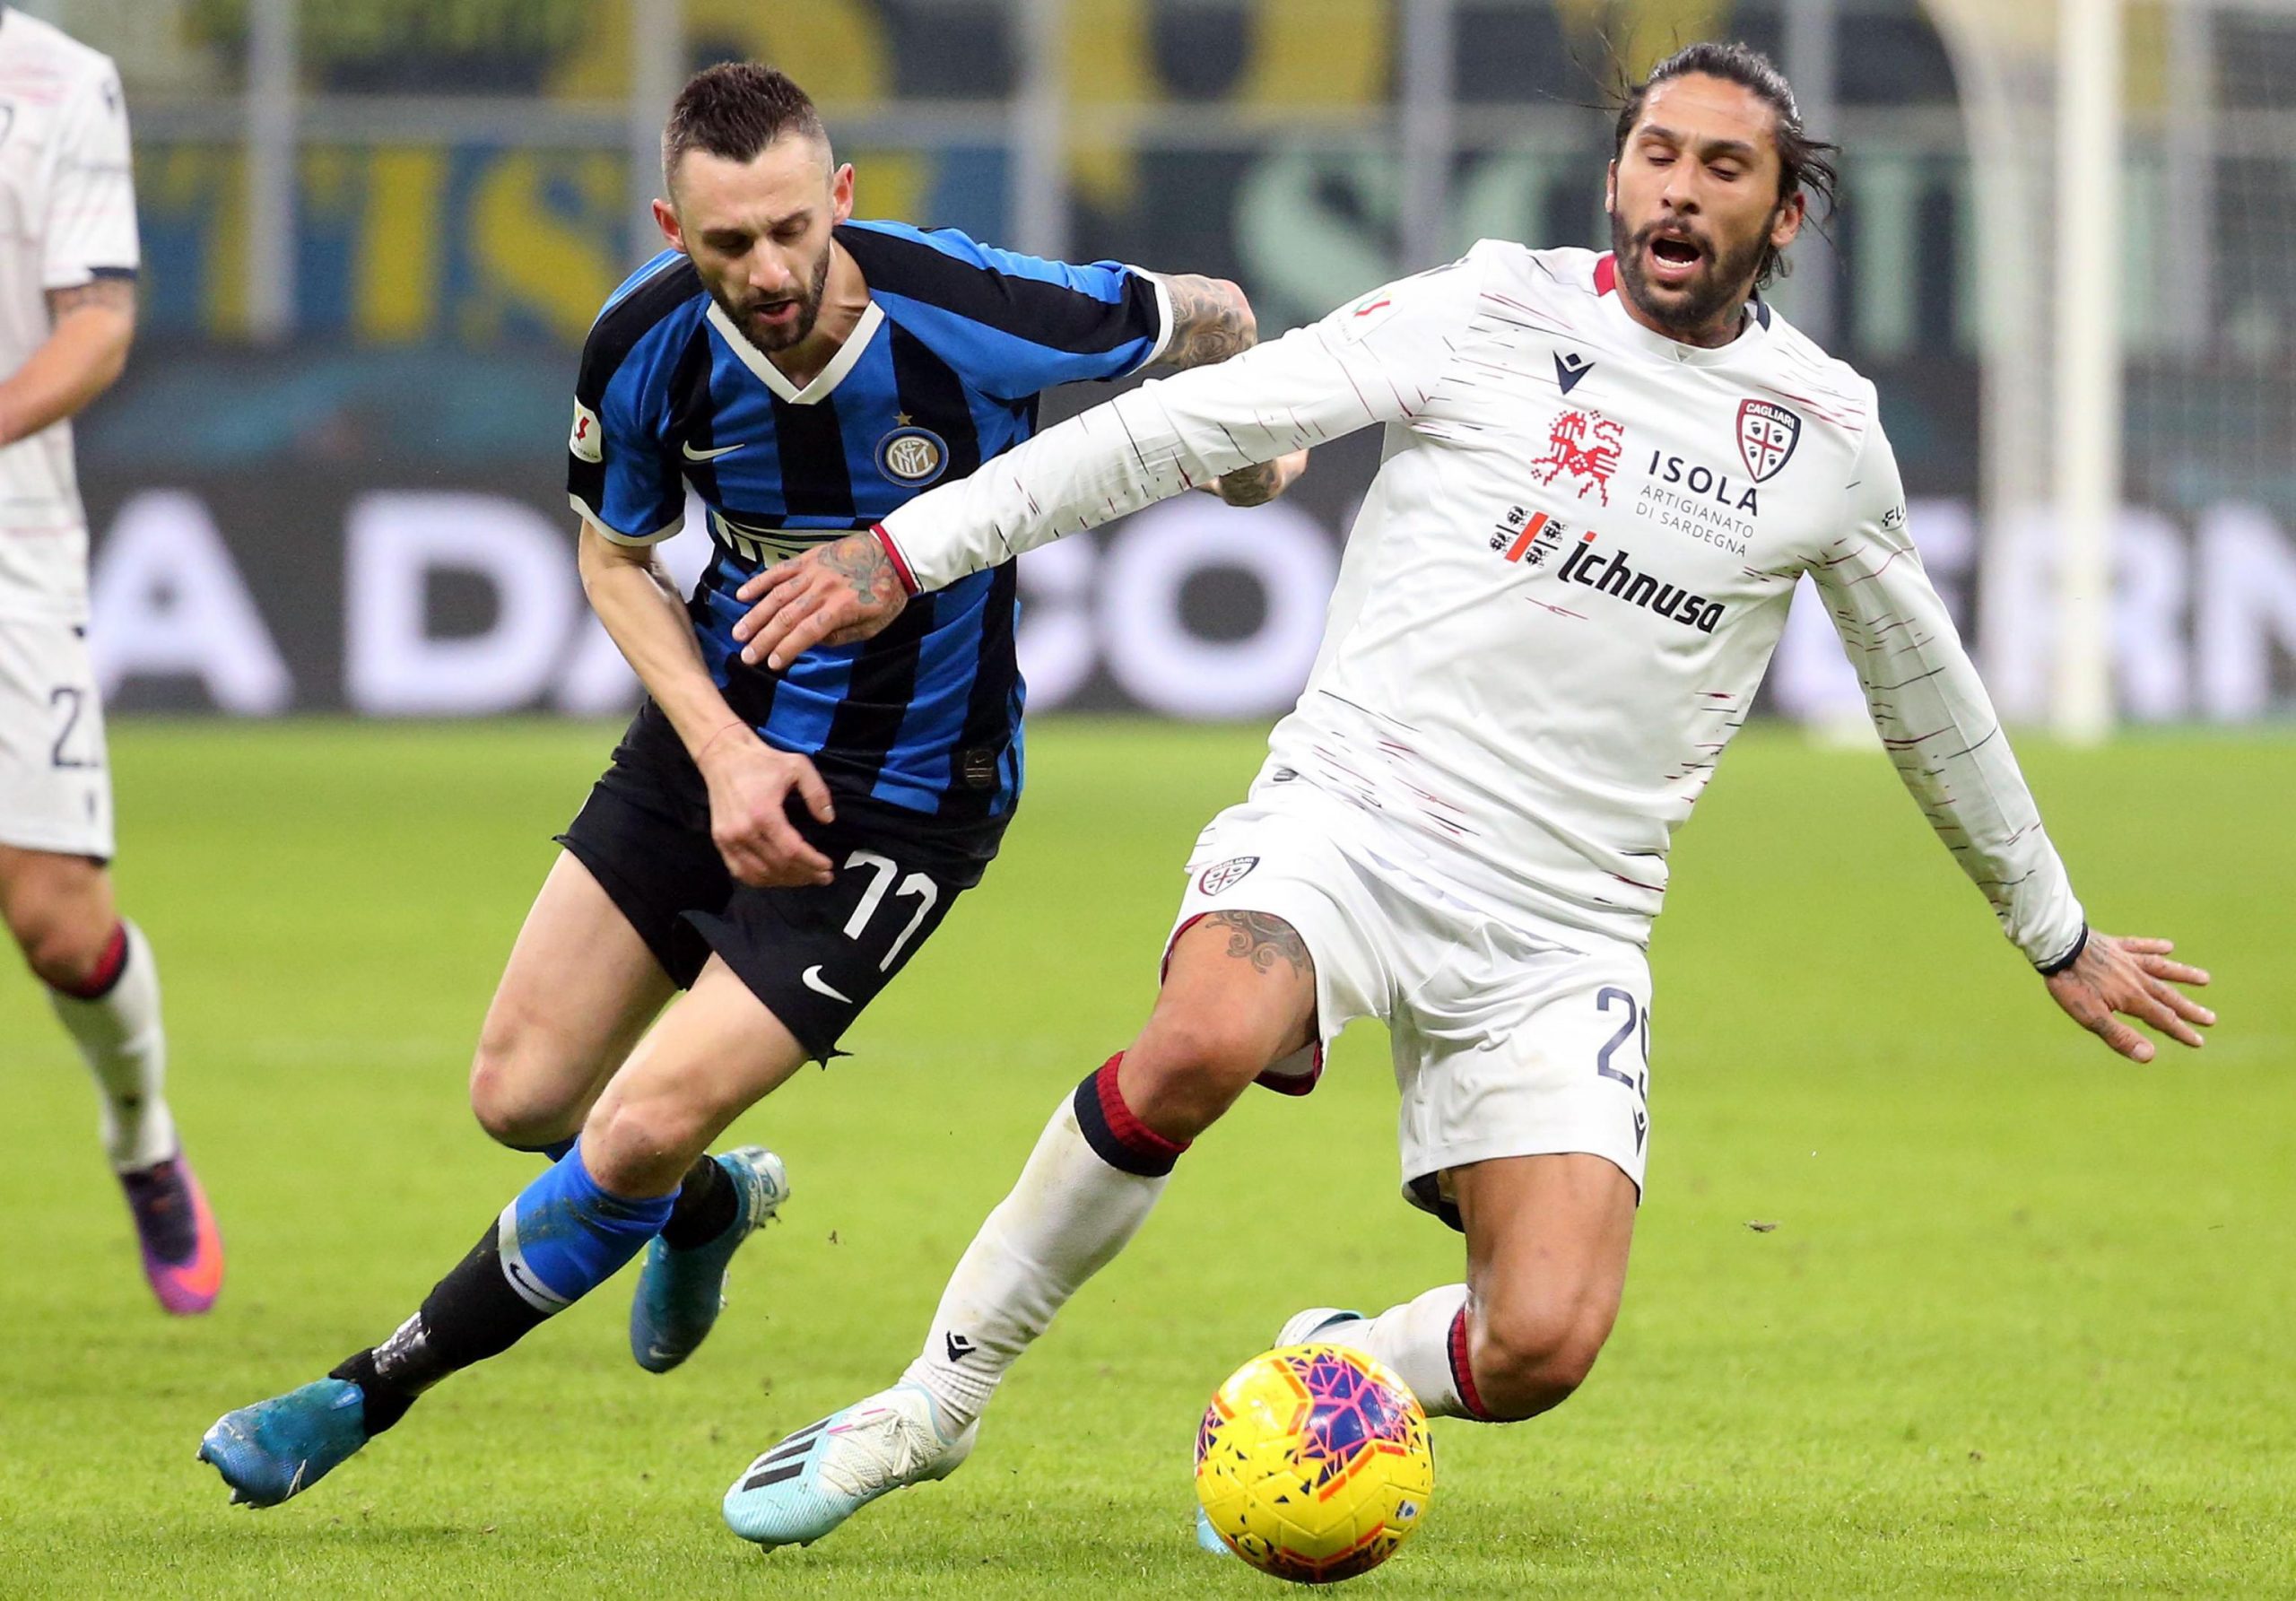 epa08128587 Inter's Marcelo Brozovic (L) and Cagliari's Lucas Castro in action during the Italy Cup round of 16 soccer match FC Inter vs Cagliari Calcio at the Giuseppe Meazza stadium in Milan, Italy, 14 January 2020.  EPA/MATTEO BAZZI